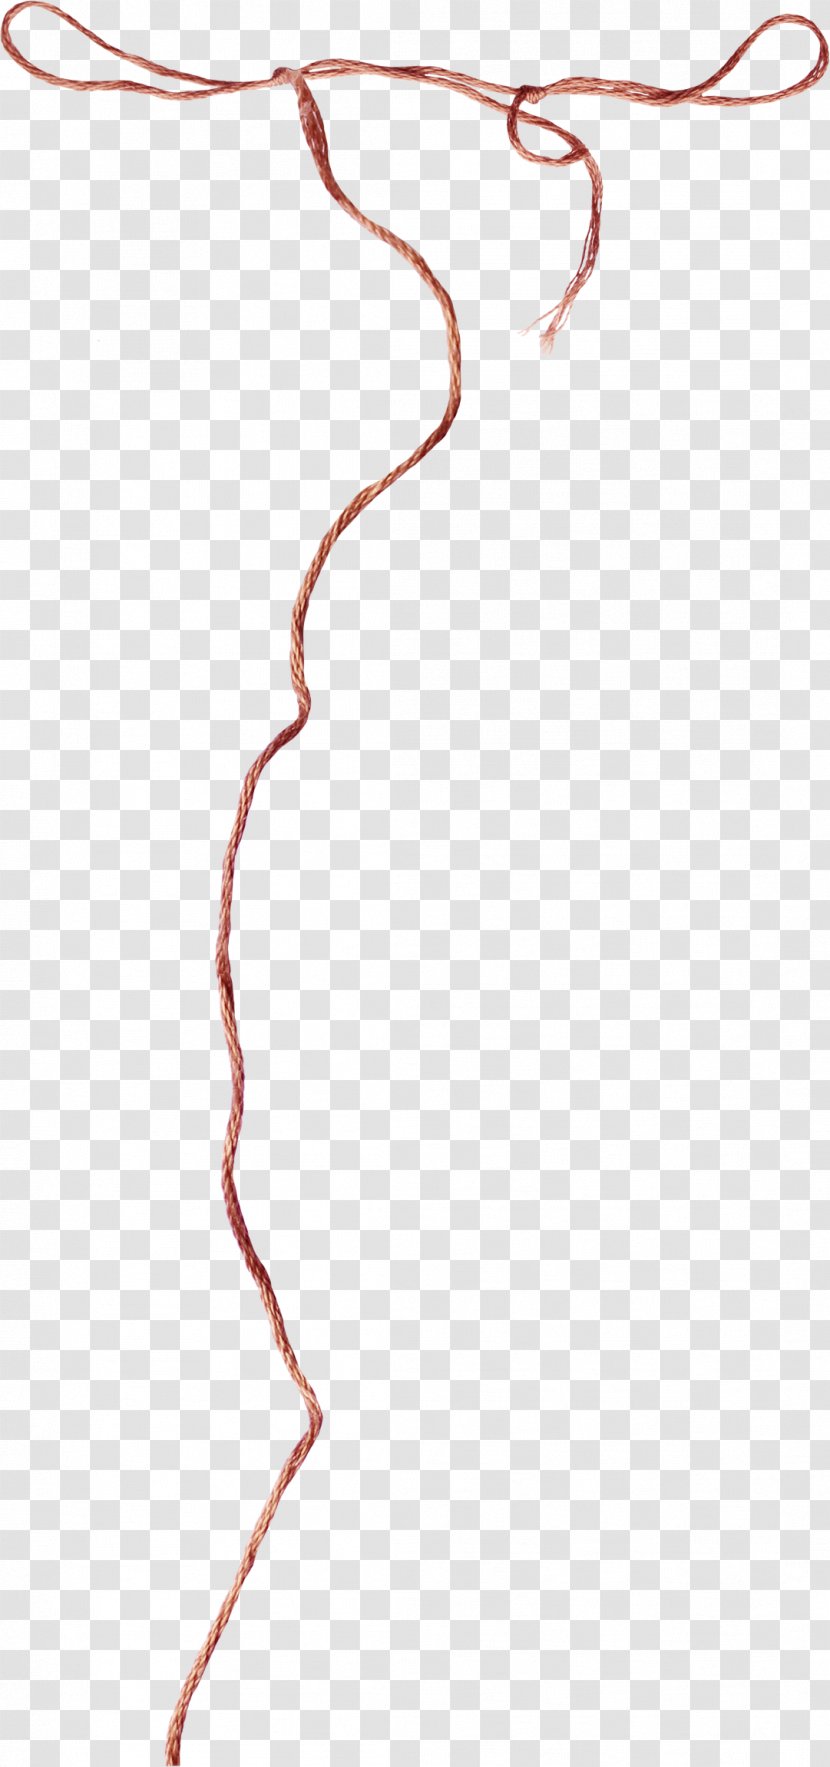 Rope Gratis Download - Knot - Knotted Lines Transparent PNG